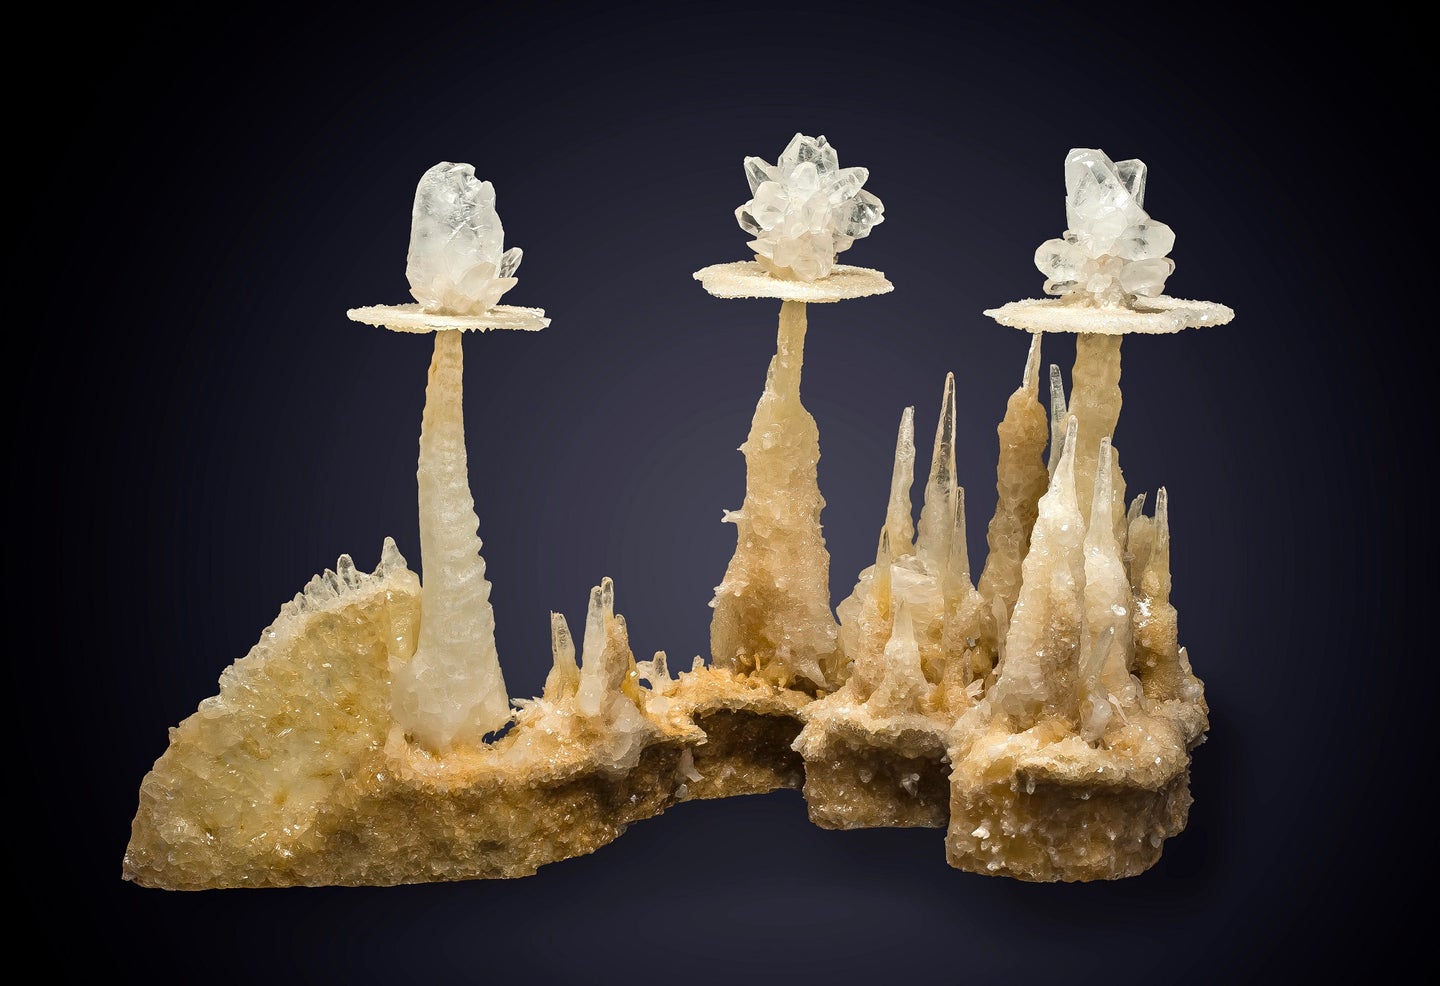 Stacks of white calcite on a black background in a mineral catalog